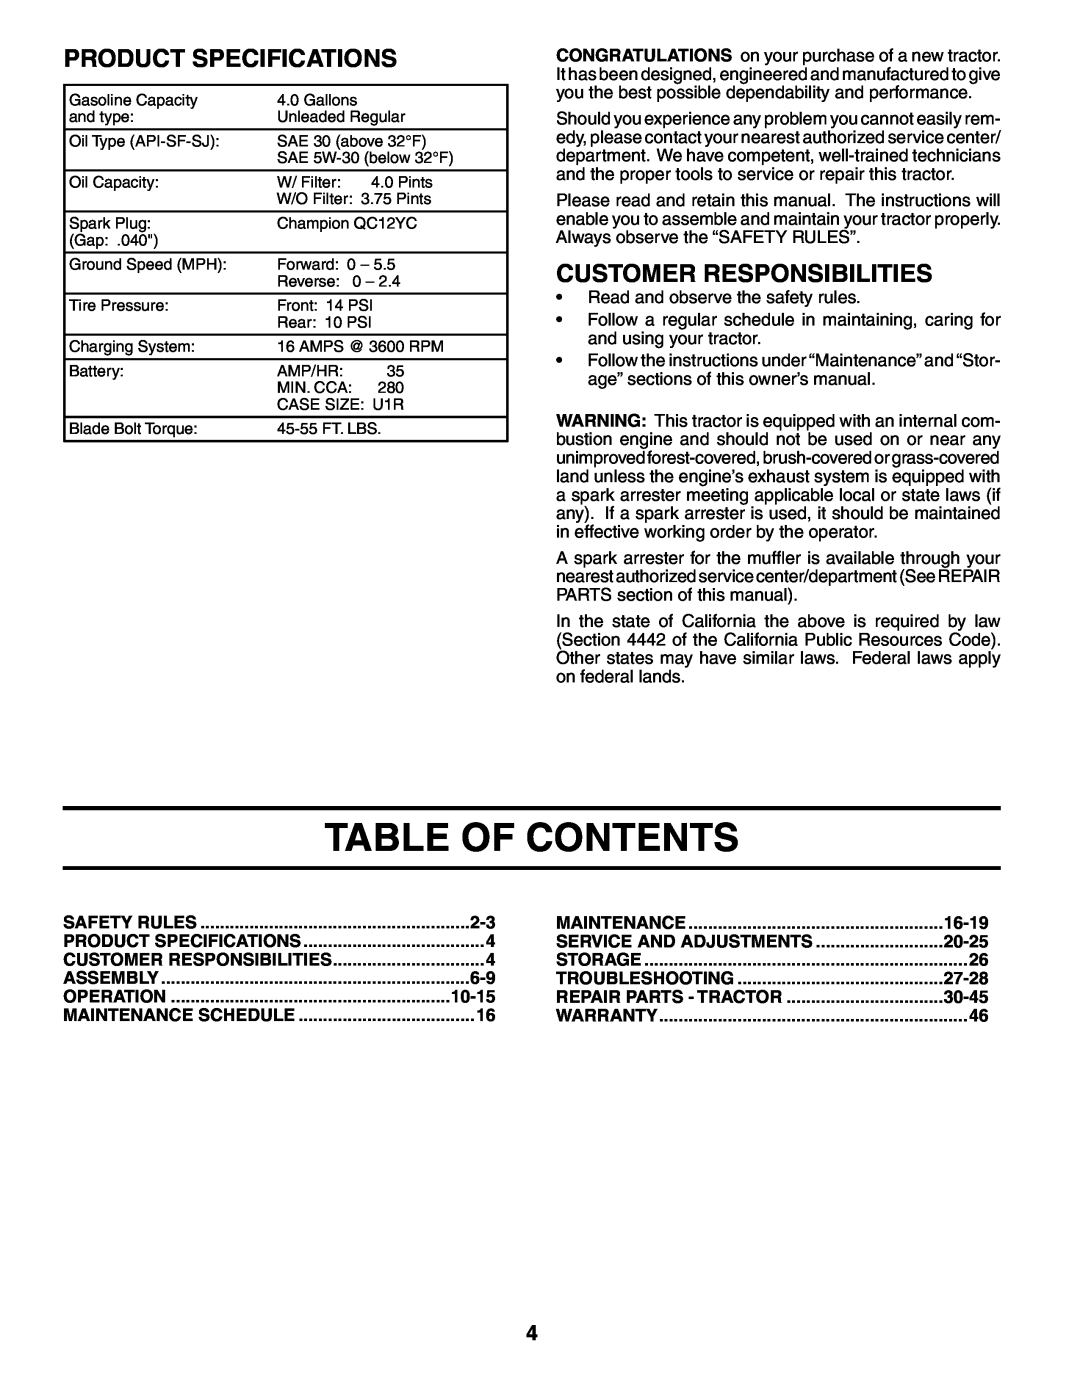 Poulan PD25PH48STD owner manual Table Of Contents, Product Specifications, Customer Responsibilities 